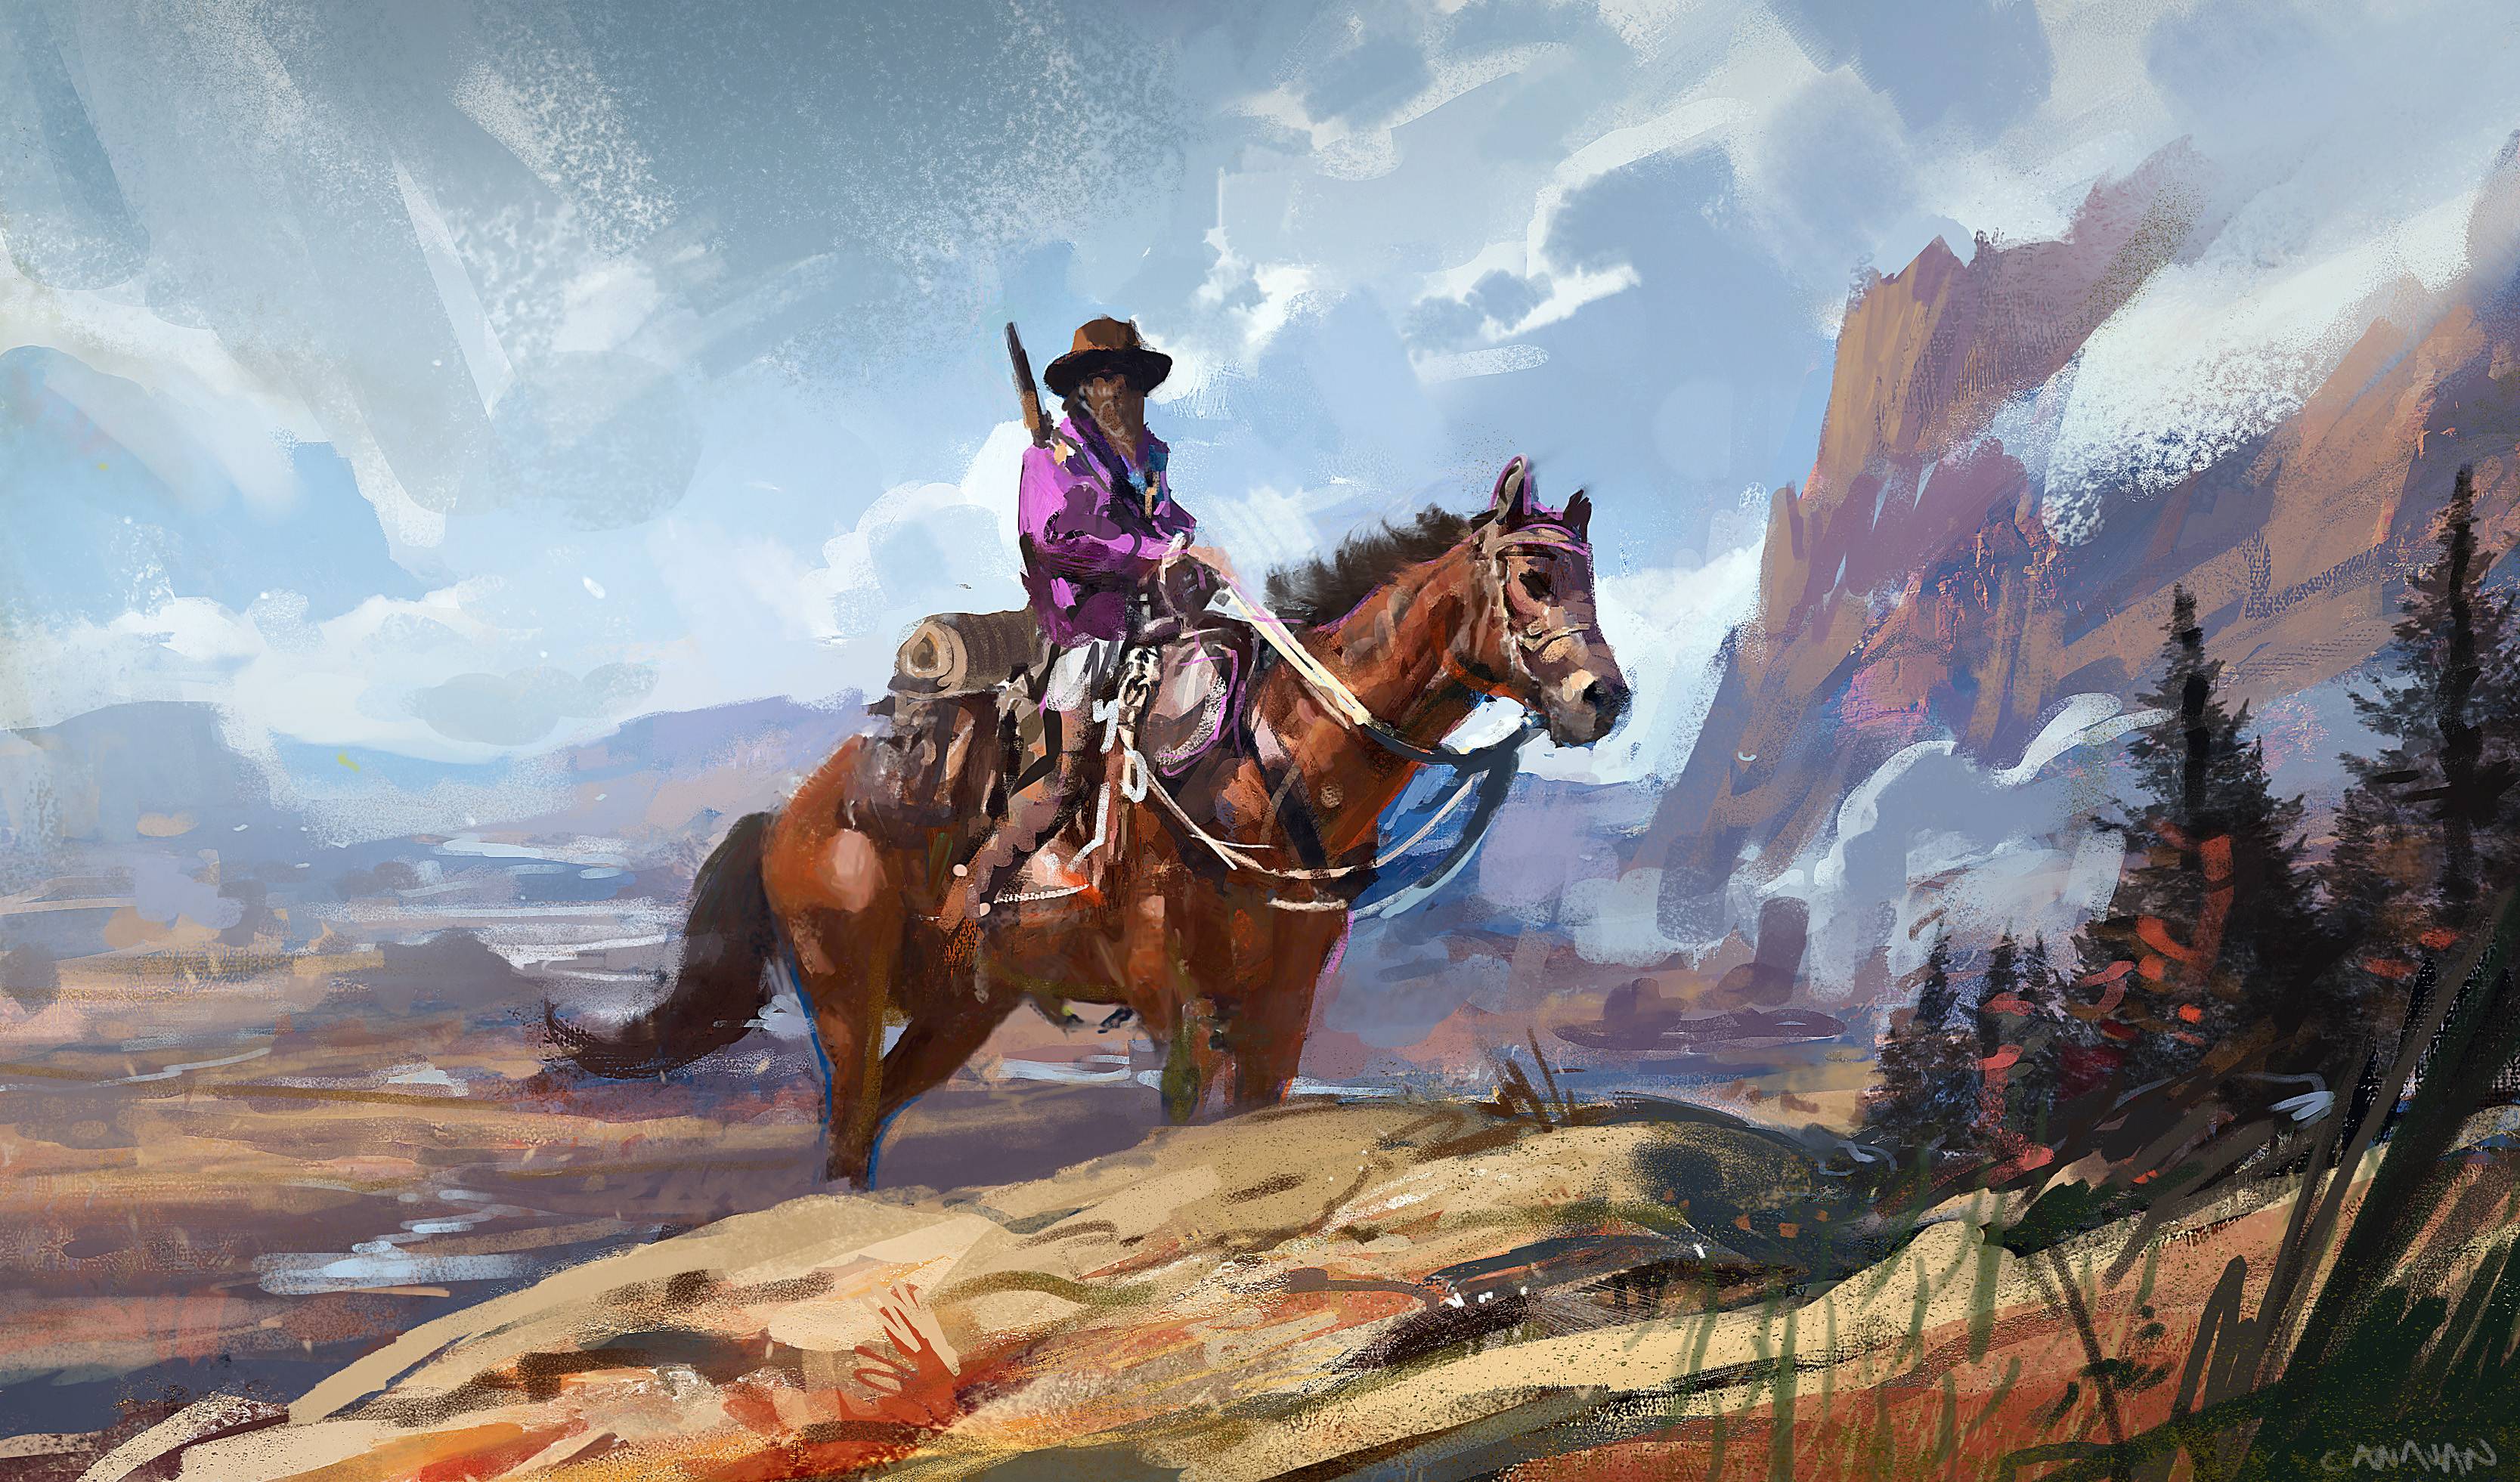 Cowboy Painting Wallpapers